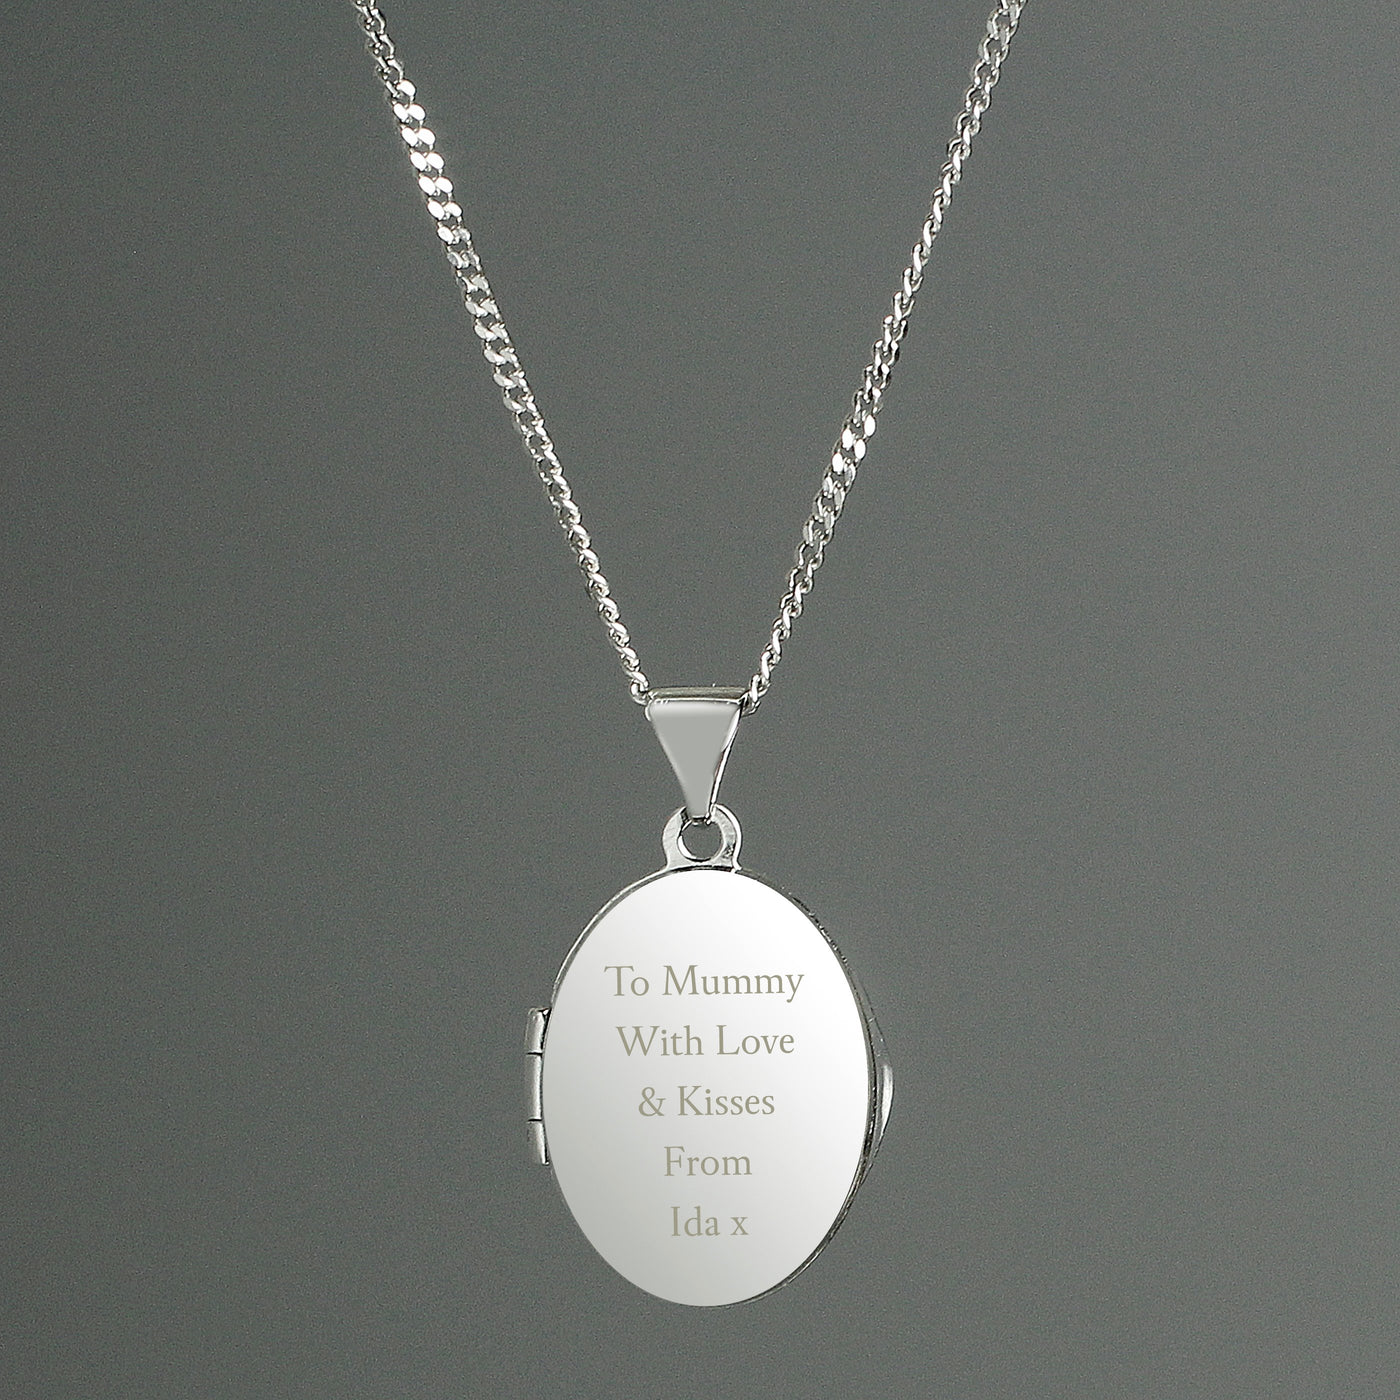 Personalised Sterling Silver Oval Message Locket Necklace - Shop Personalised Gifts